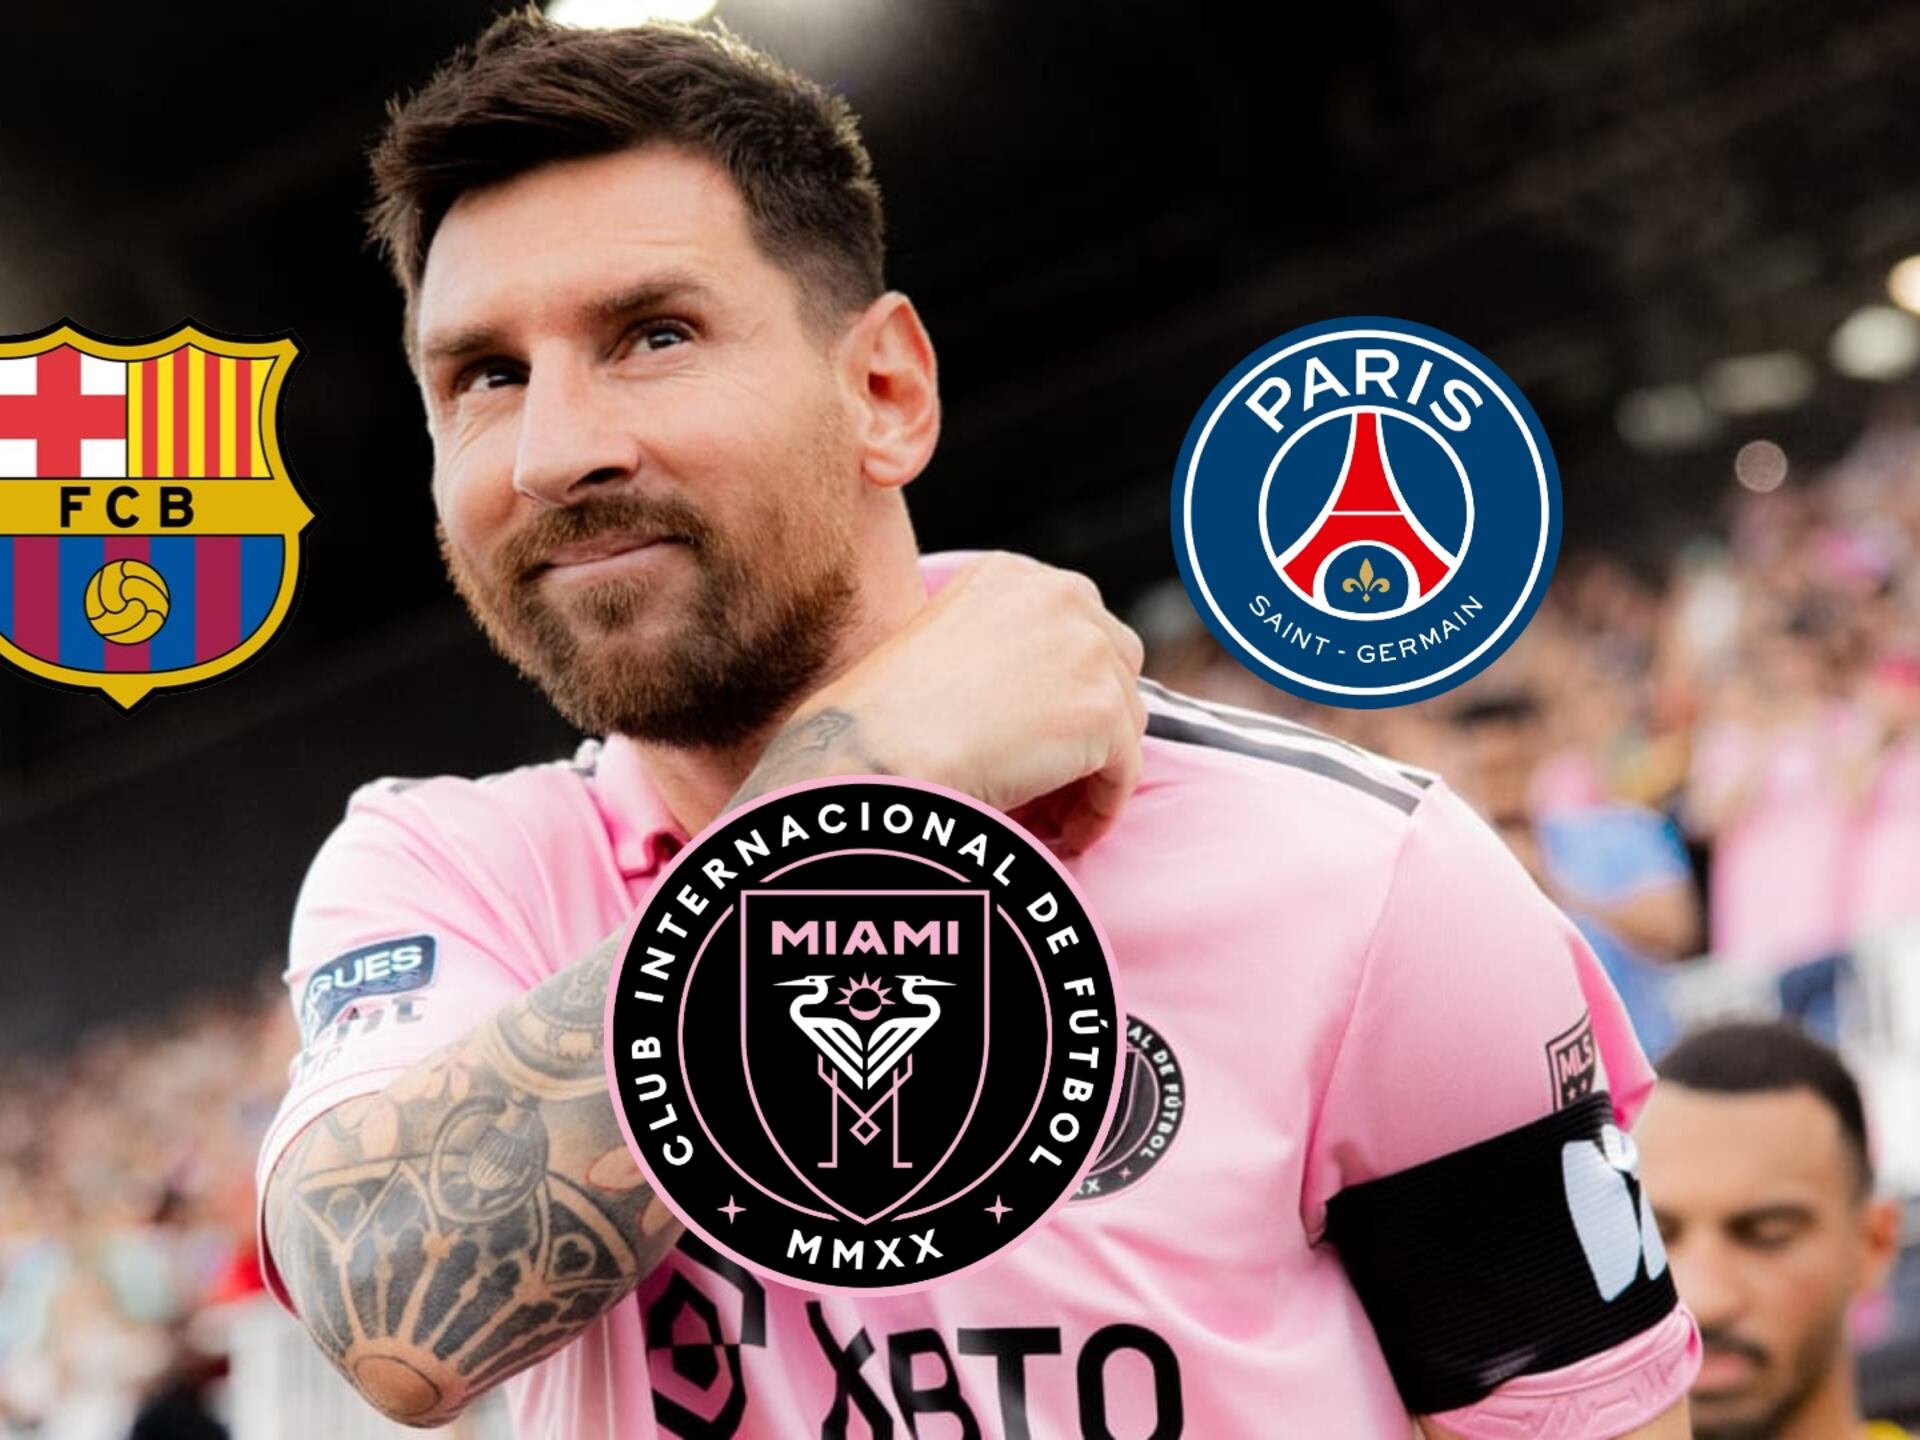 (VIDEO) Messi signed lots of jerseys of different teams where he played, but the missing one that generates controversy